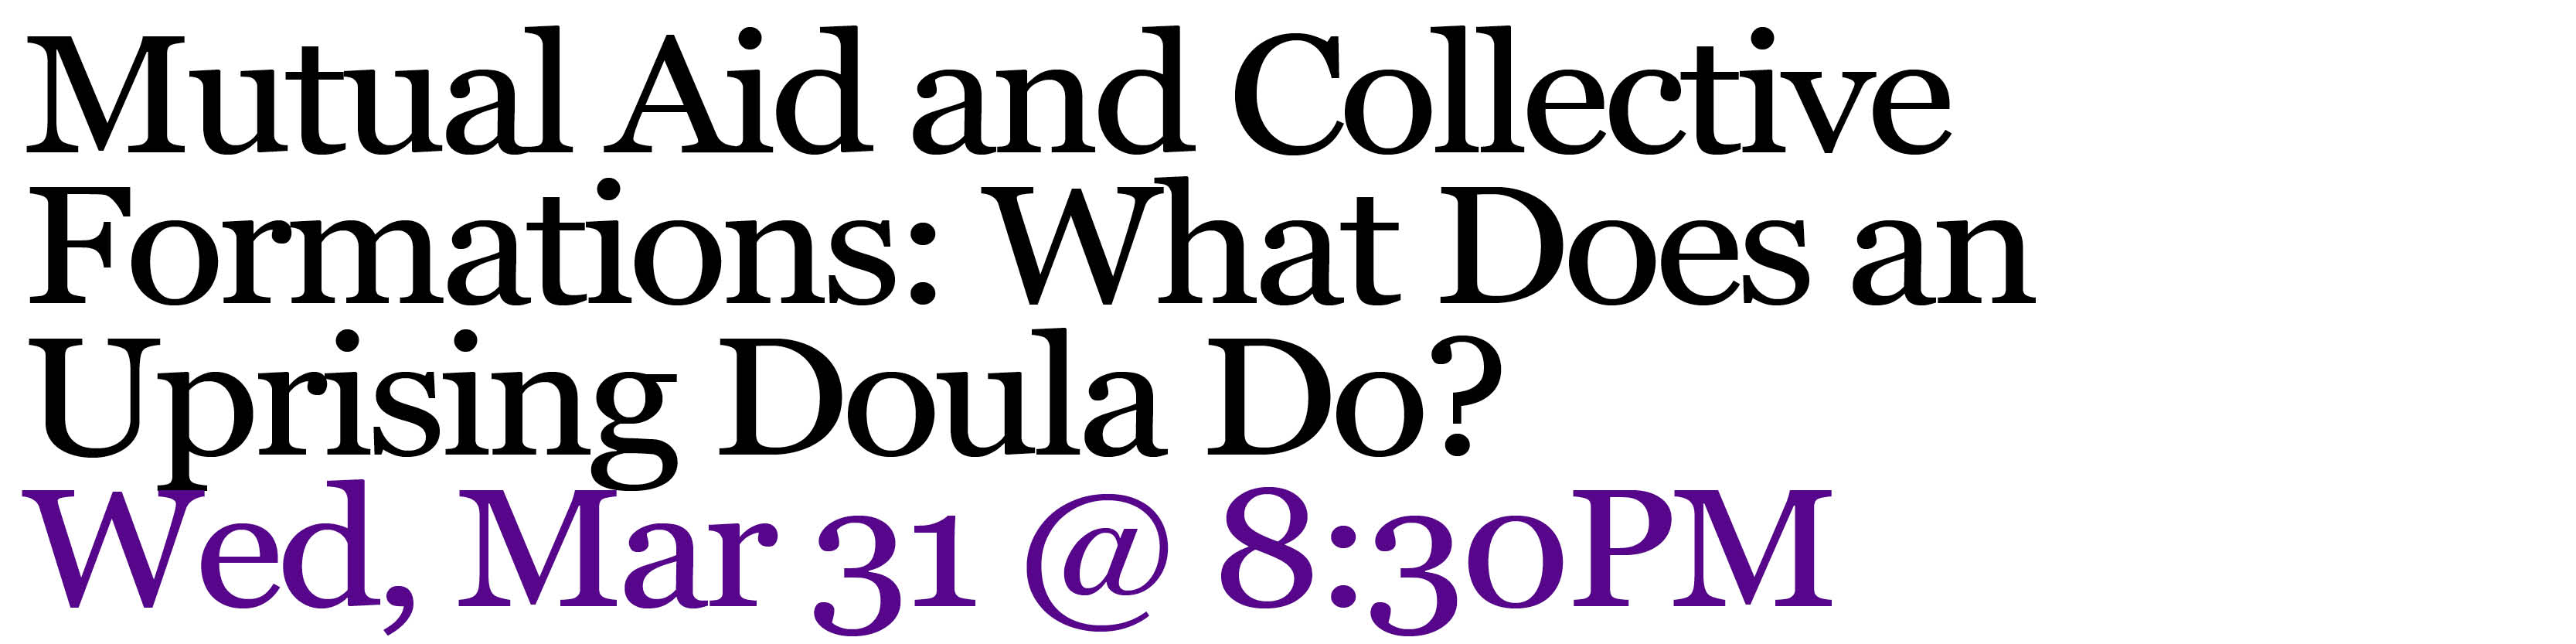 Mutual Aid and Collective Forulation: What Does an Uprising Doula Do? Wed, Mar 31 @ 8:30PM